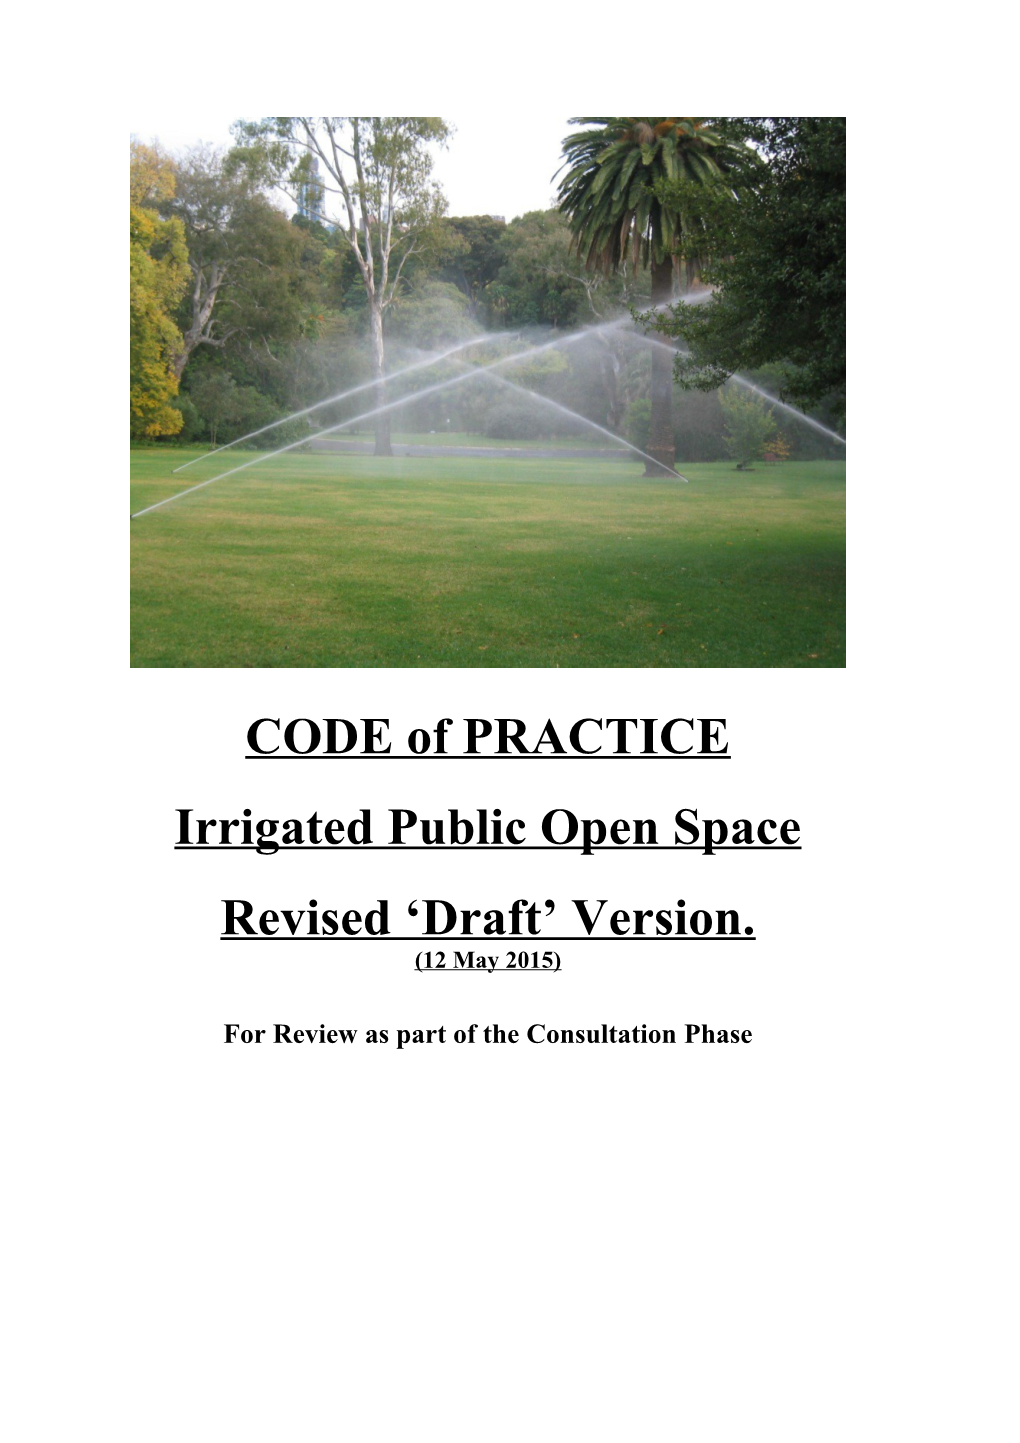 Irrigated Public Open Space